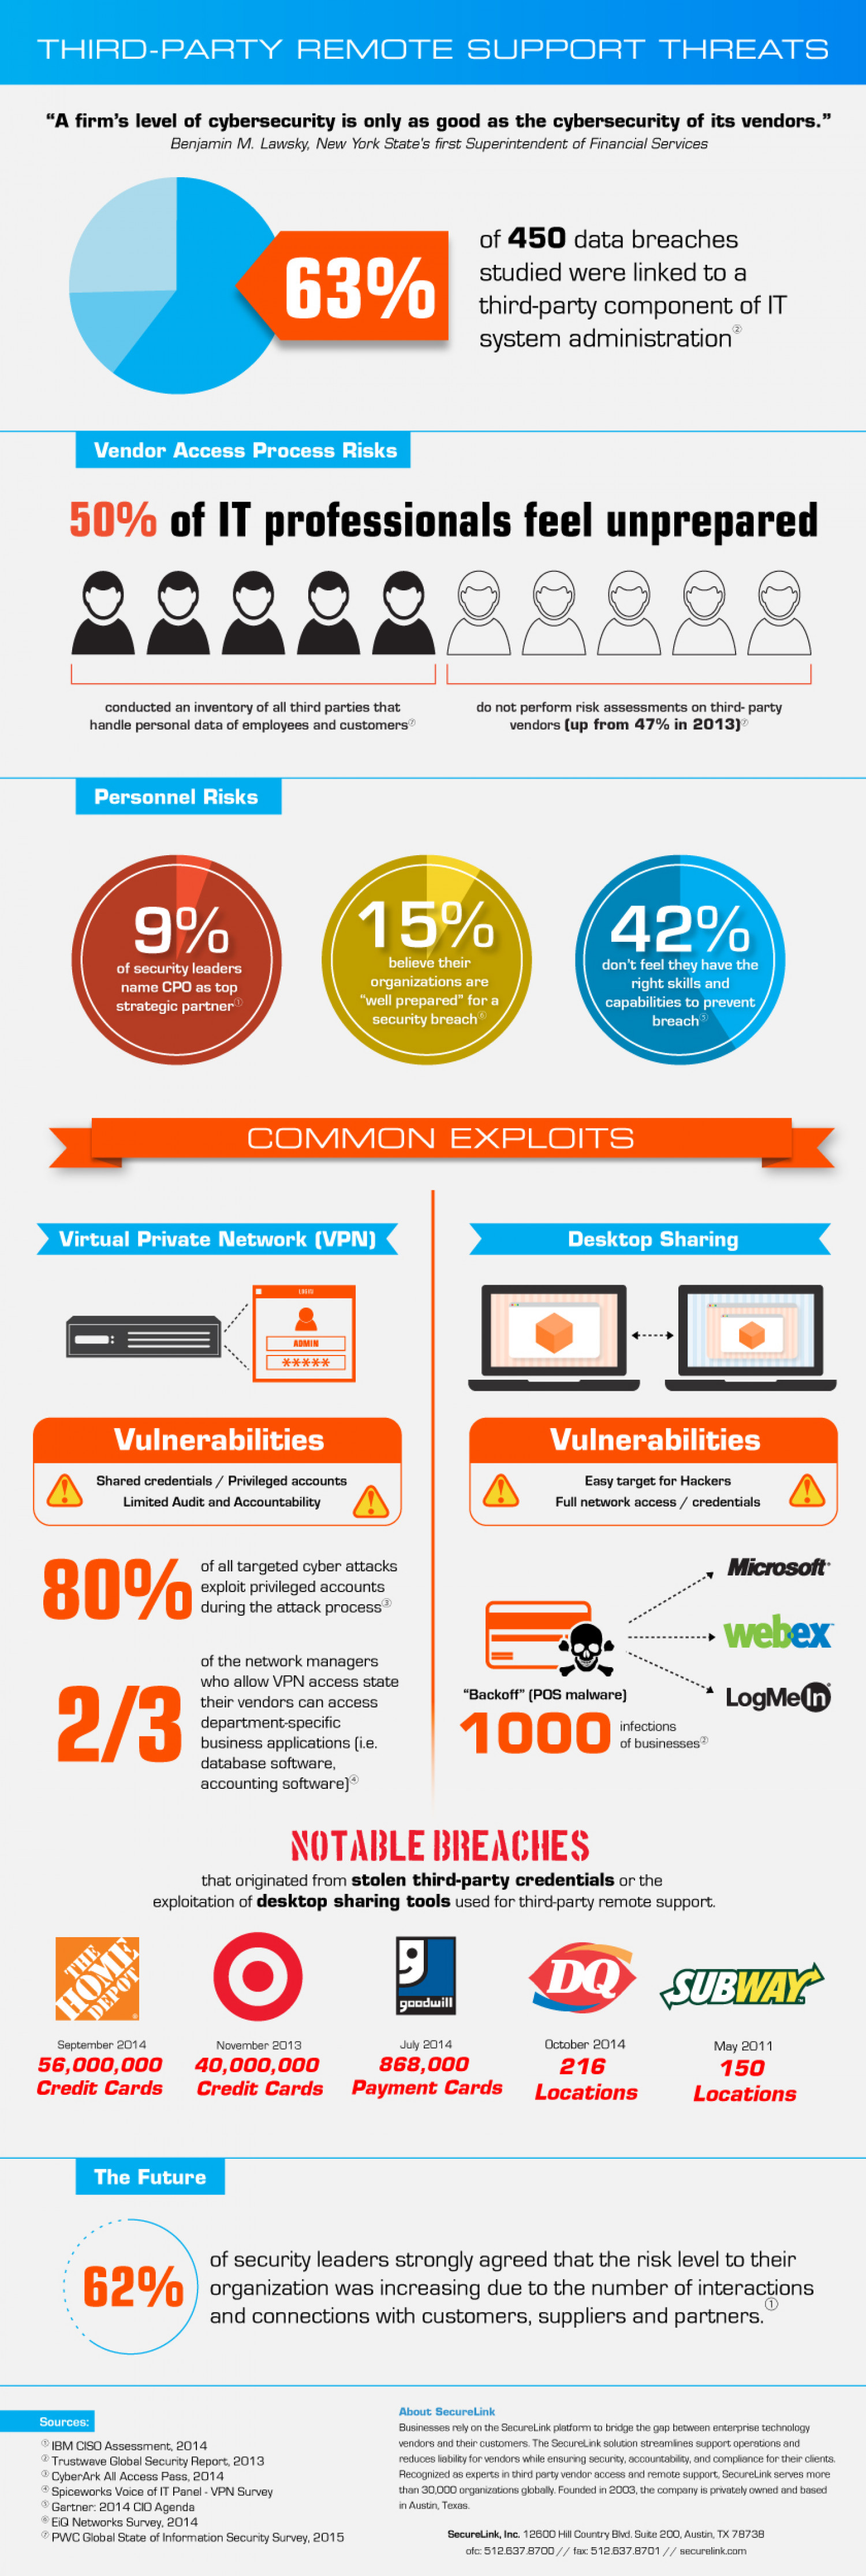 Third-Party Remote Support Threats Infographic